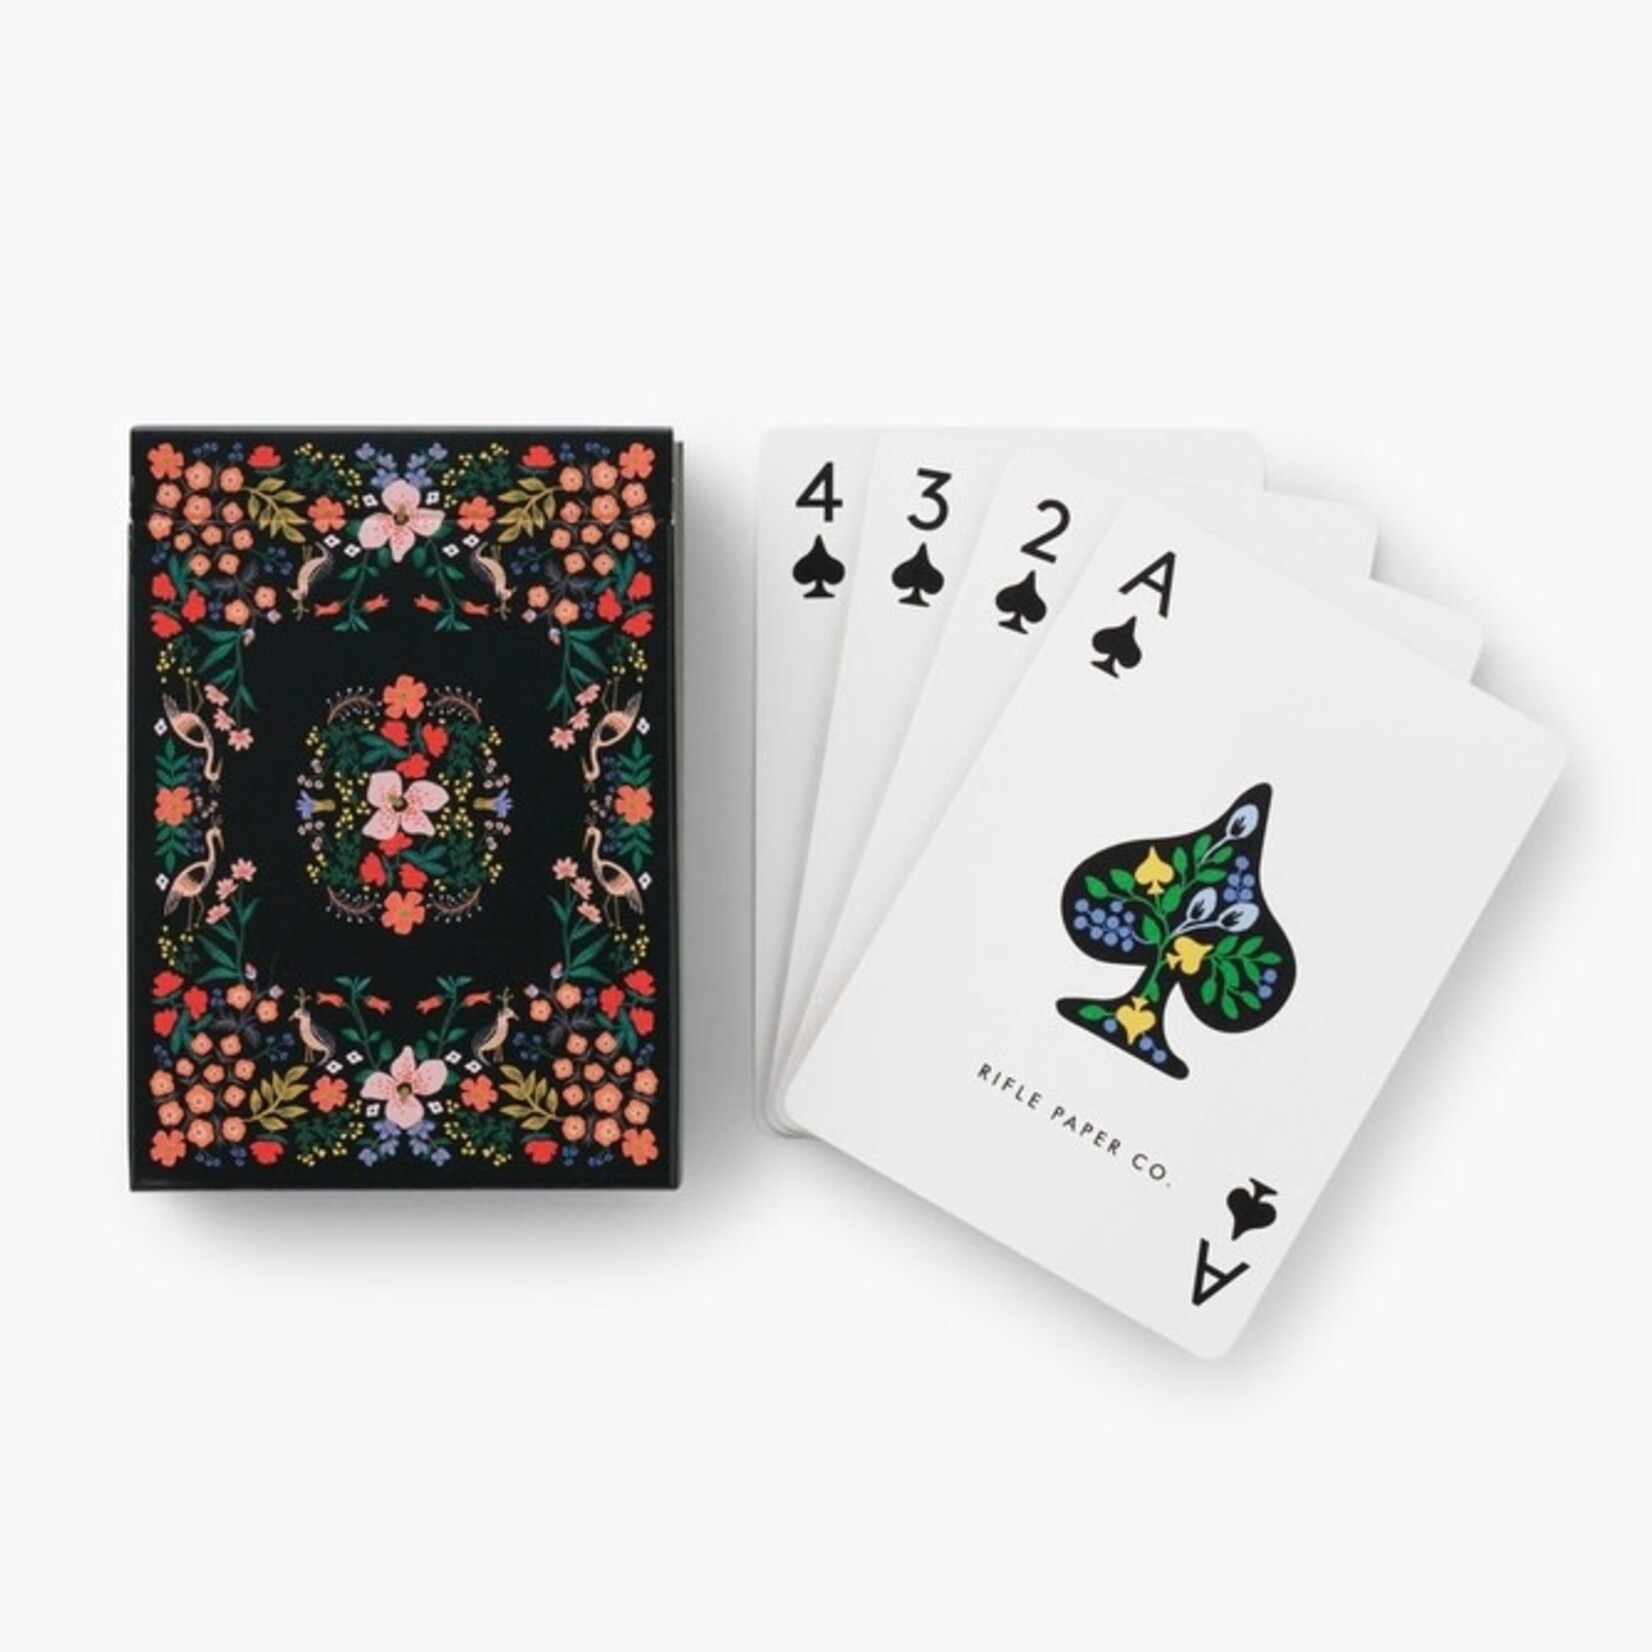 Rifle Paper Co Hawthorne Two-Deck Playing Cards